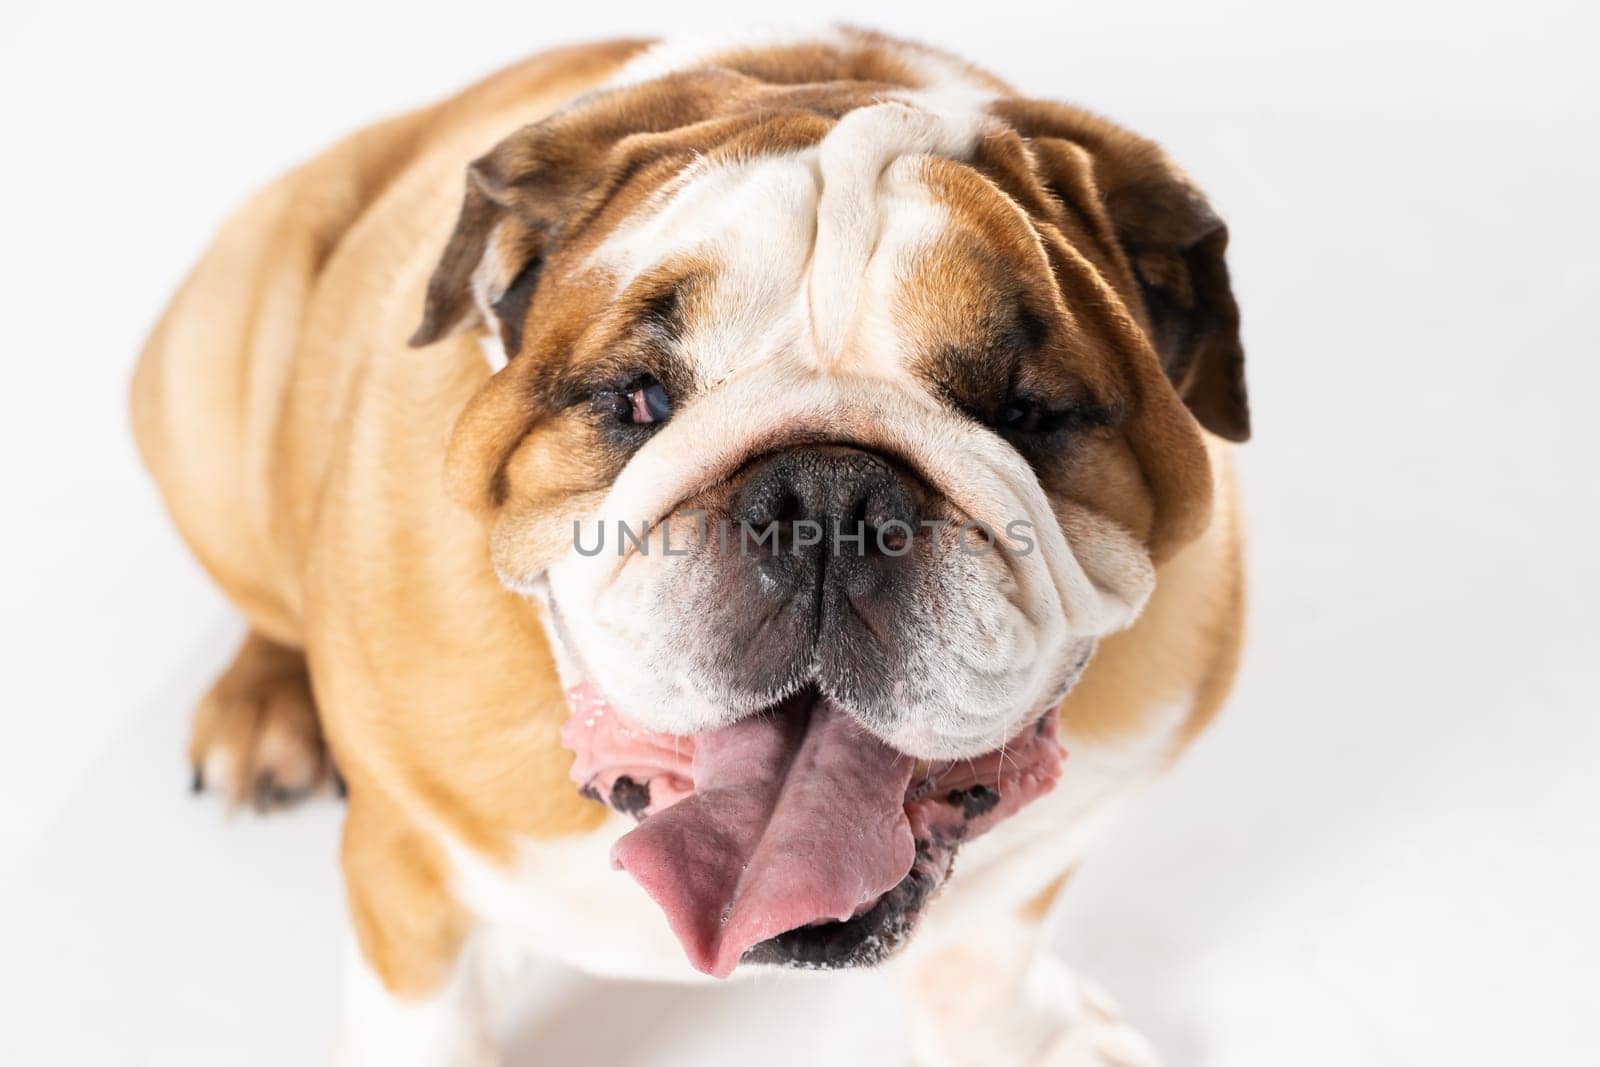 Open mouth. The English Bulldog was bred as a companion and deterrent dog. A breed with a brown coat with white patches.